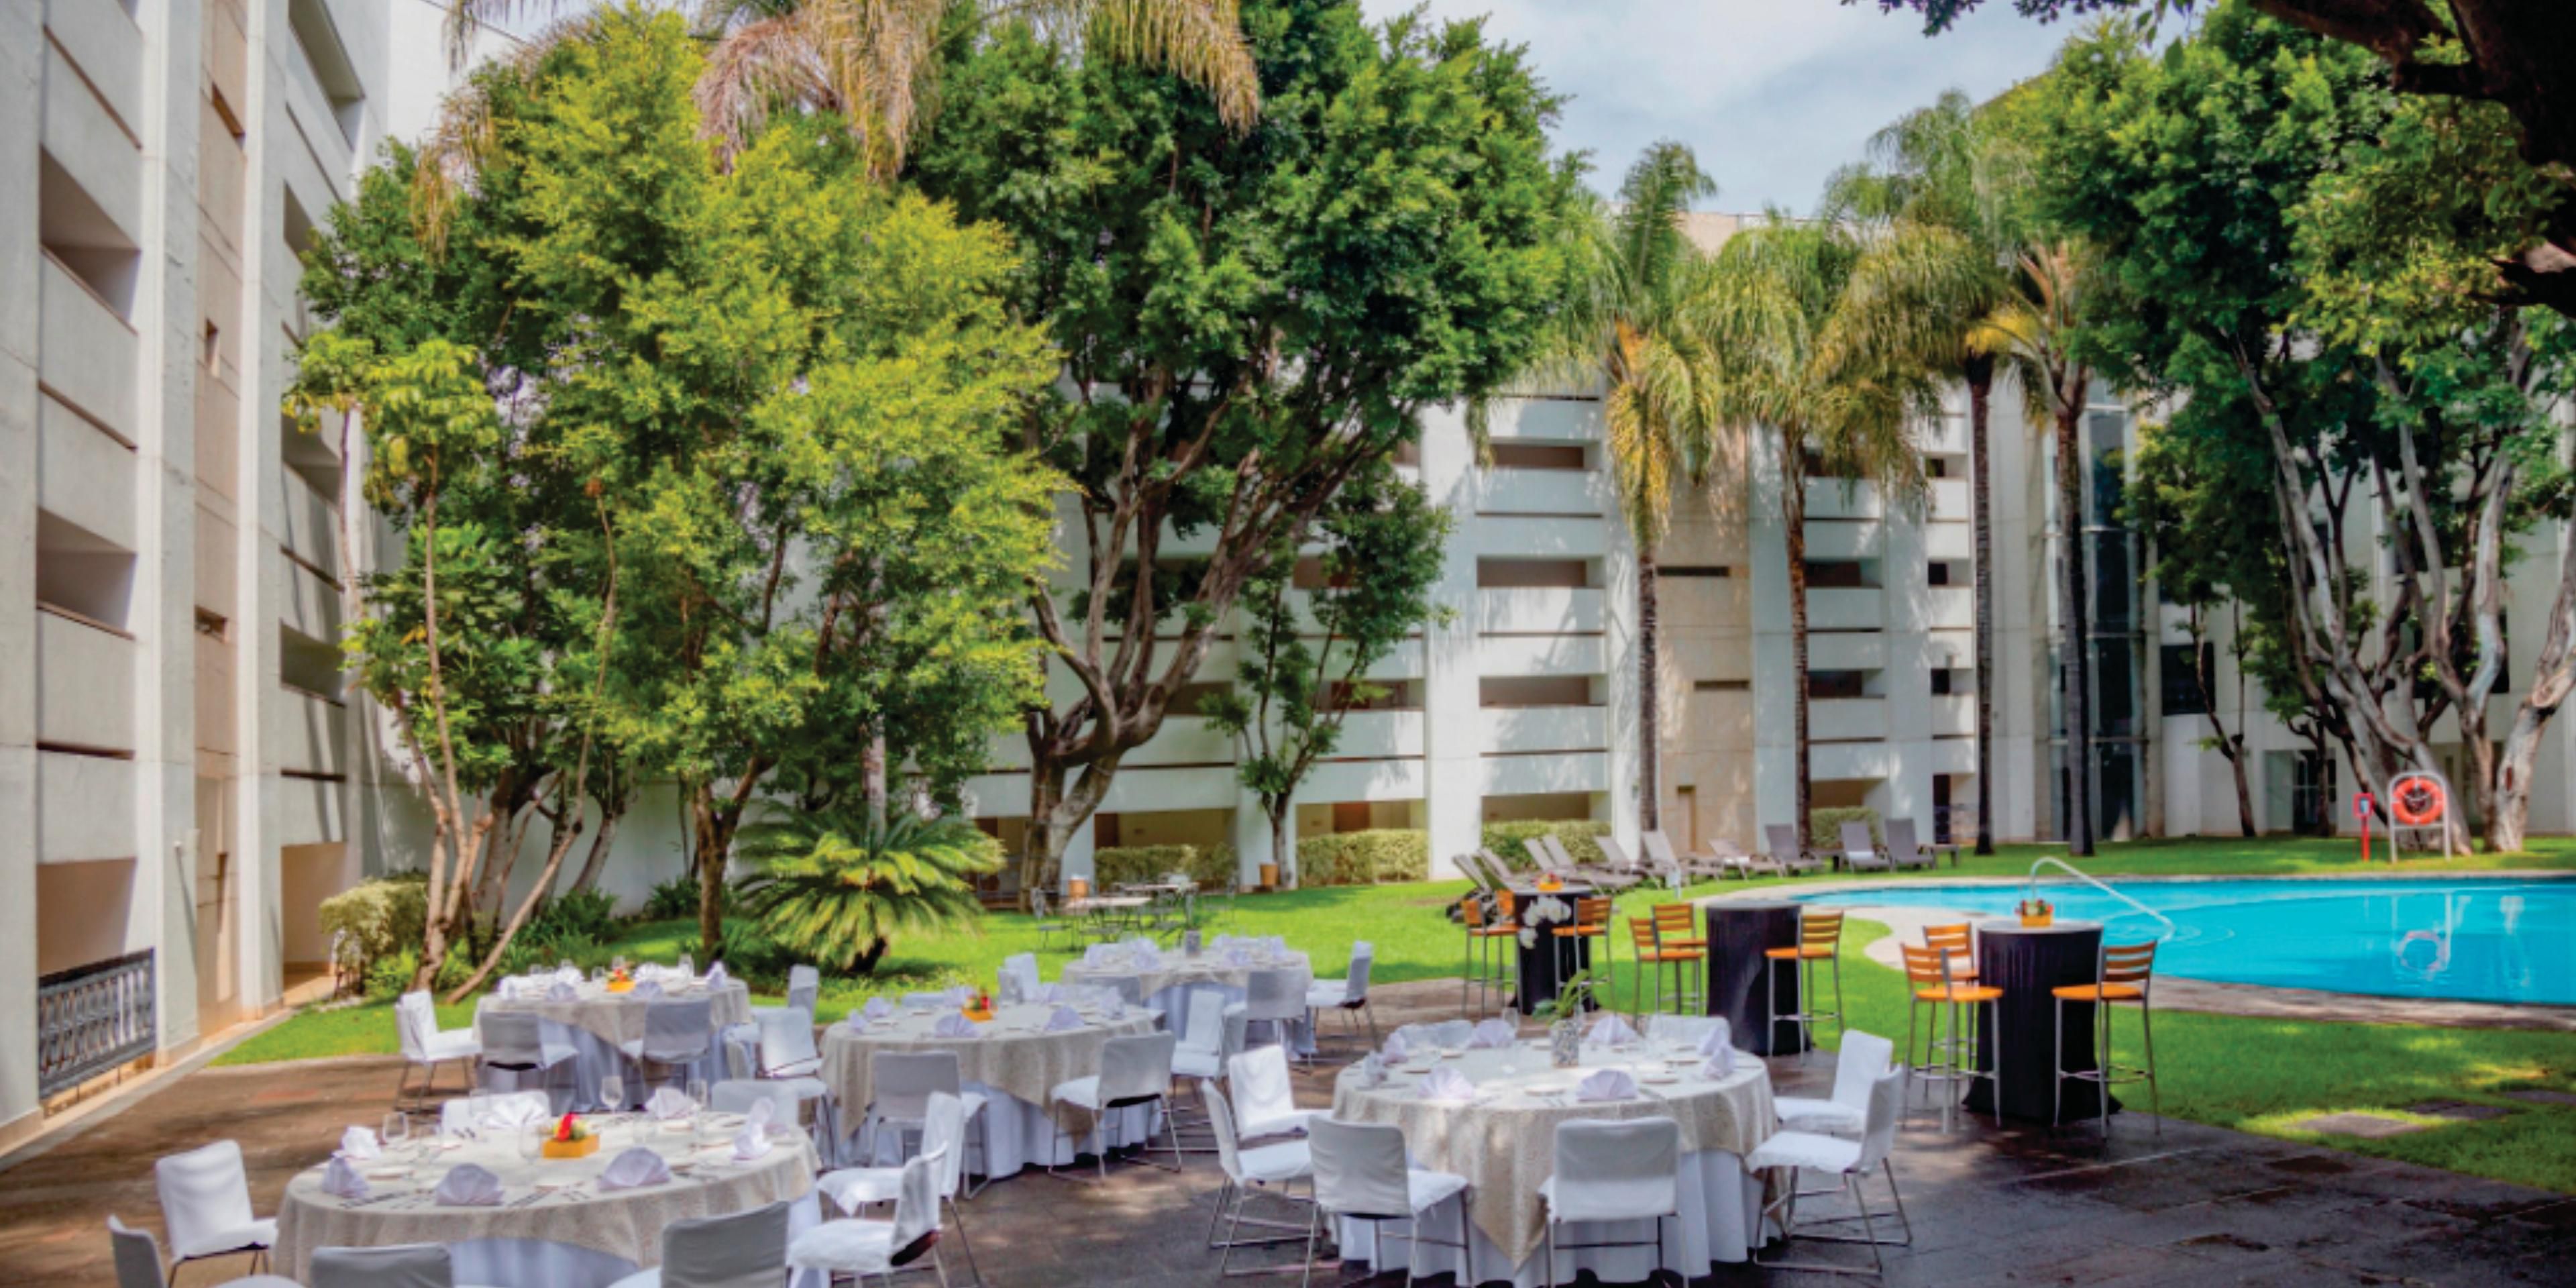 Our service, elegance and culinary delight will be constant for your perfect day.

Our facilities can be from a very intimate and family gathering, to a huge reception with spaces for up to 450 people.

At InterContinental Puebla, we can offer you a variety of packages fully customizable to your needs.

Dream it, and we will make it happen!